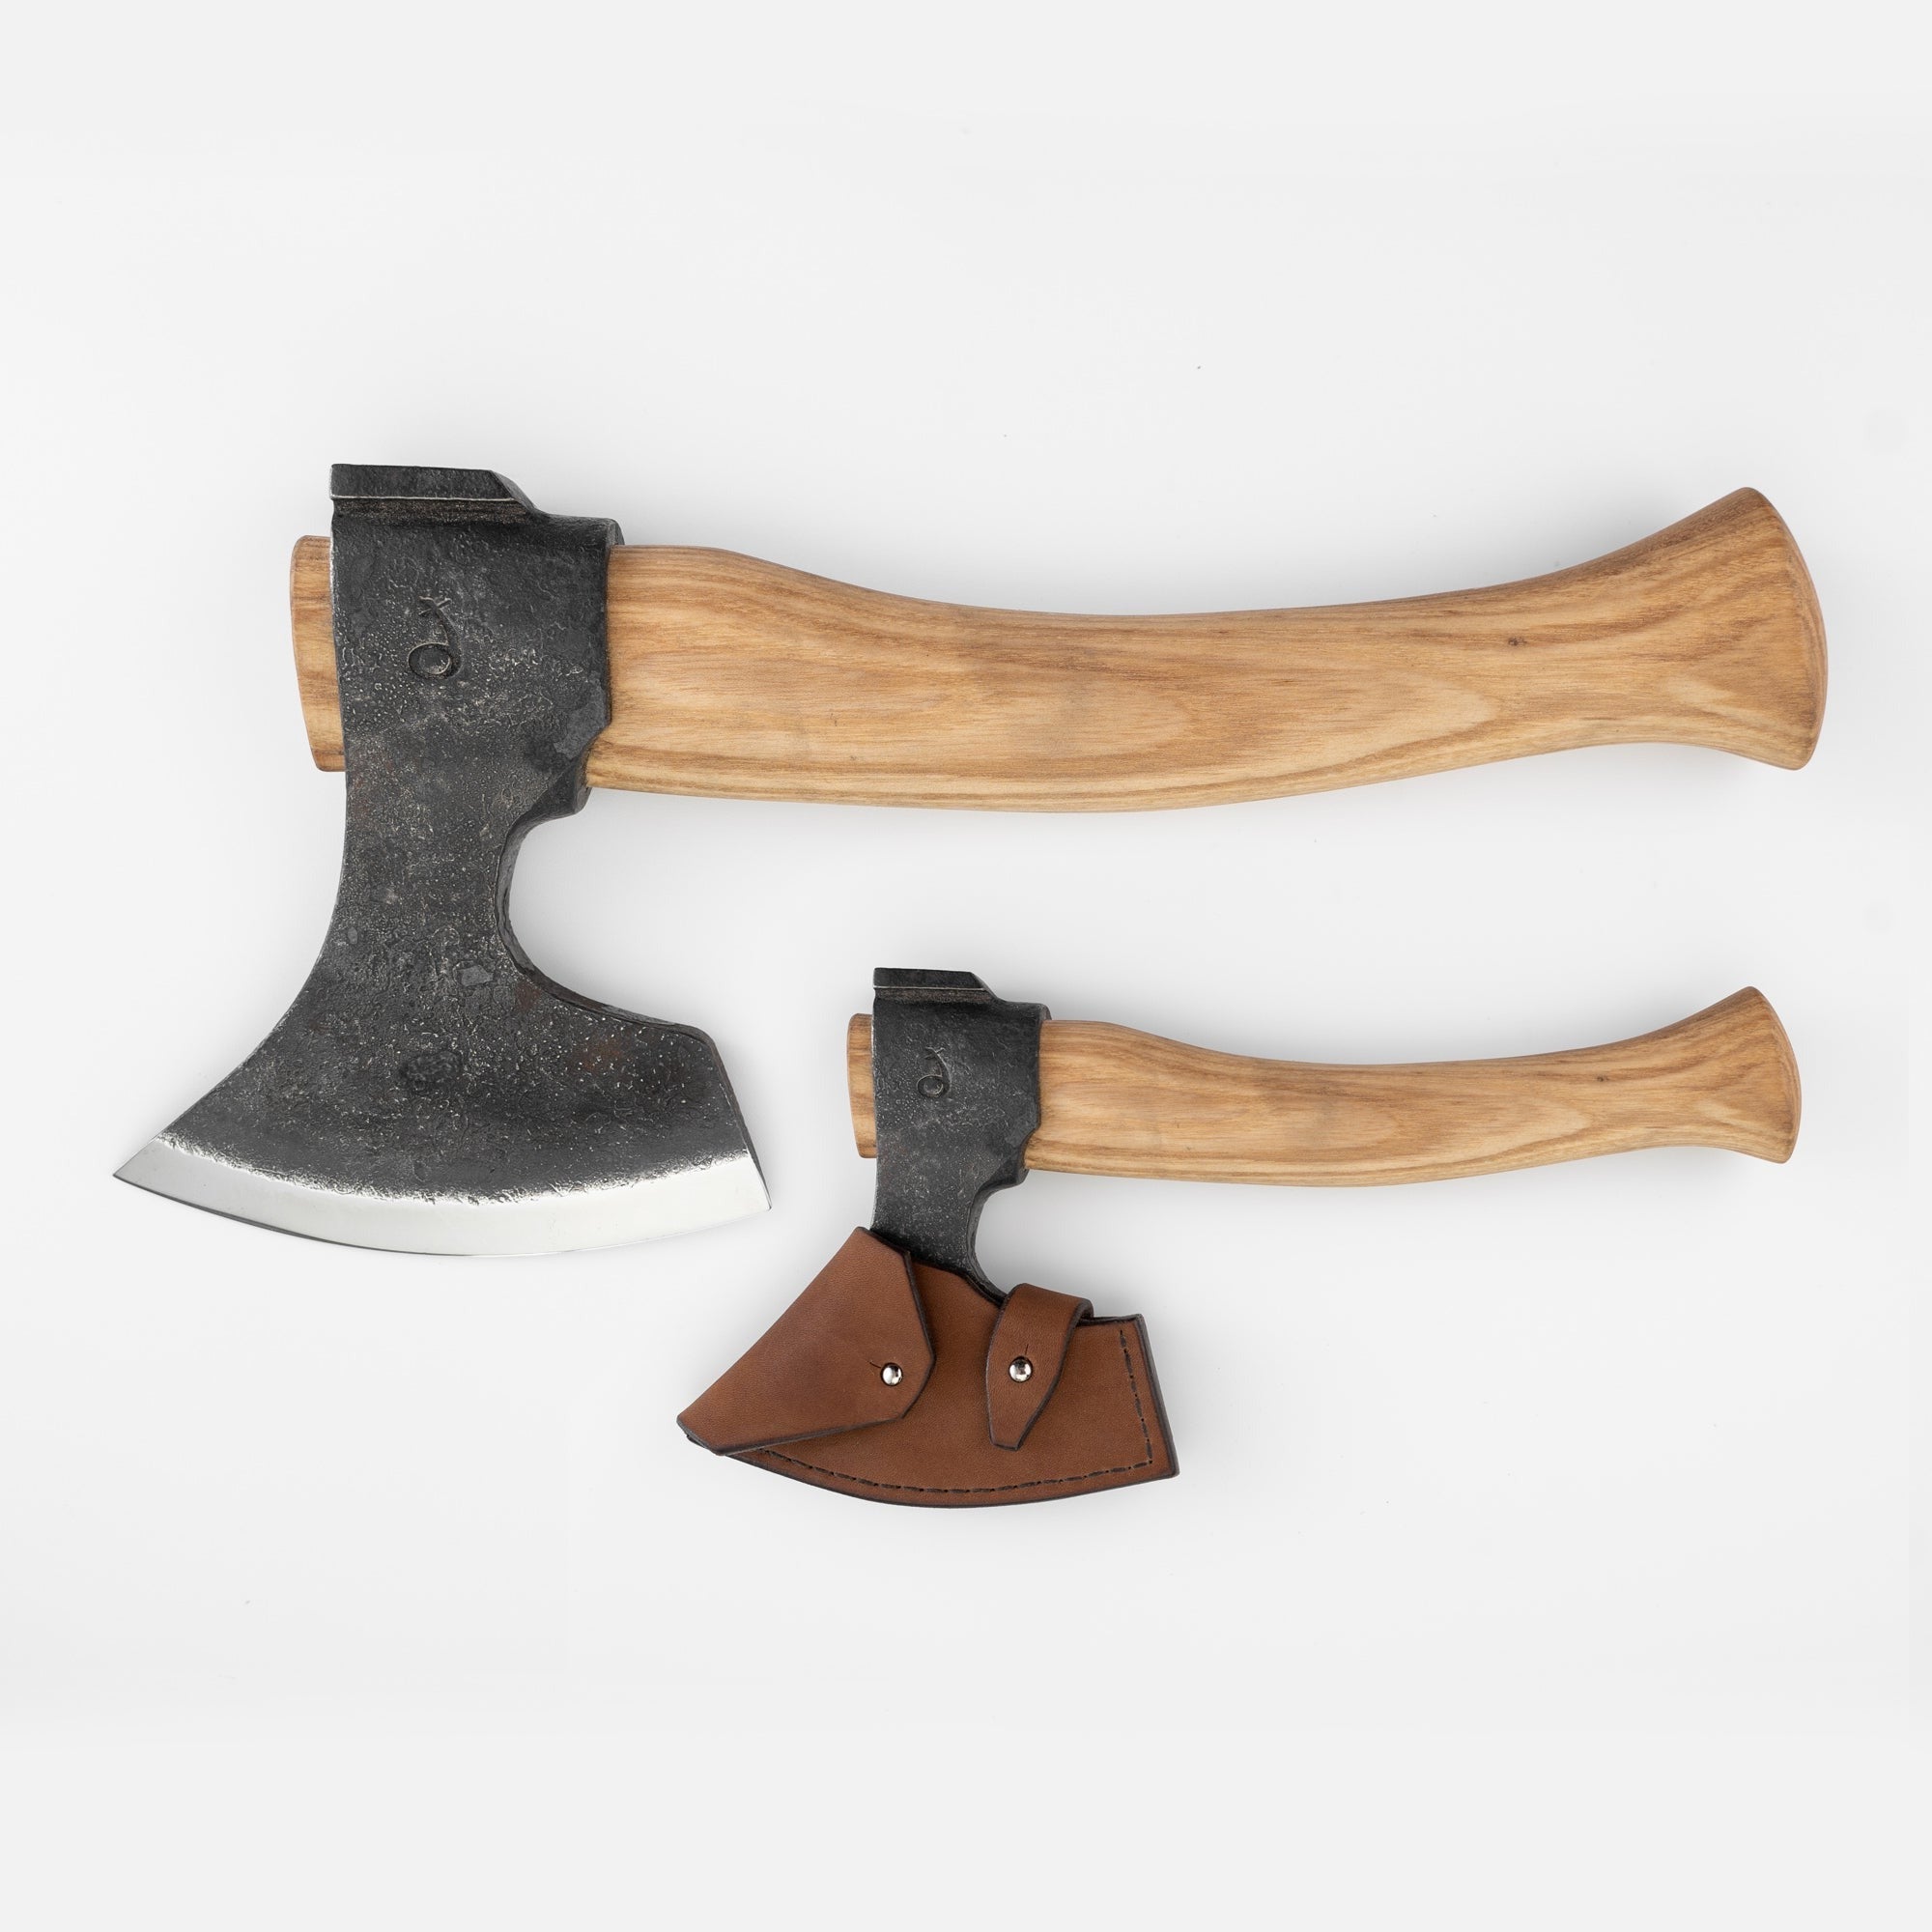 Small-Sized Carving Axe – Fadir.tool